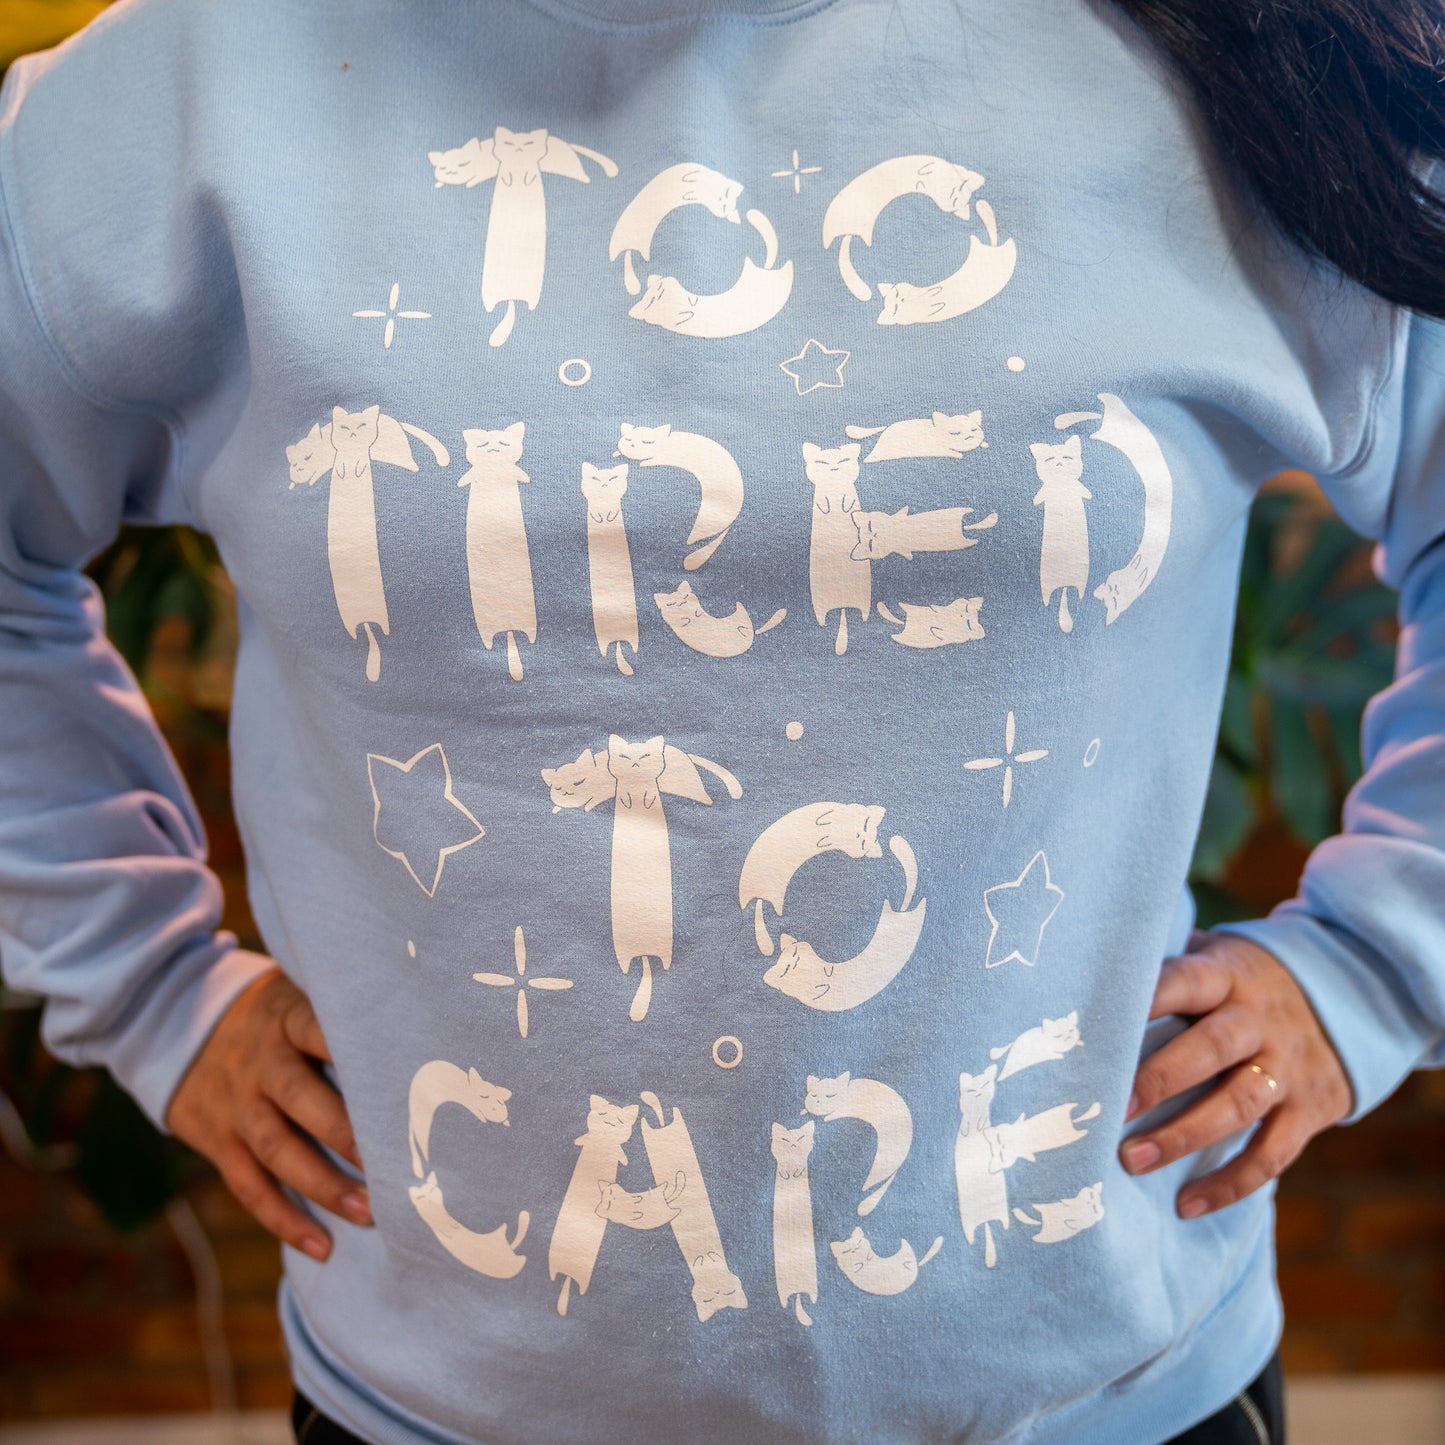 Too Tired To Care Sweater Blue